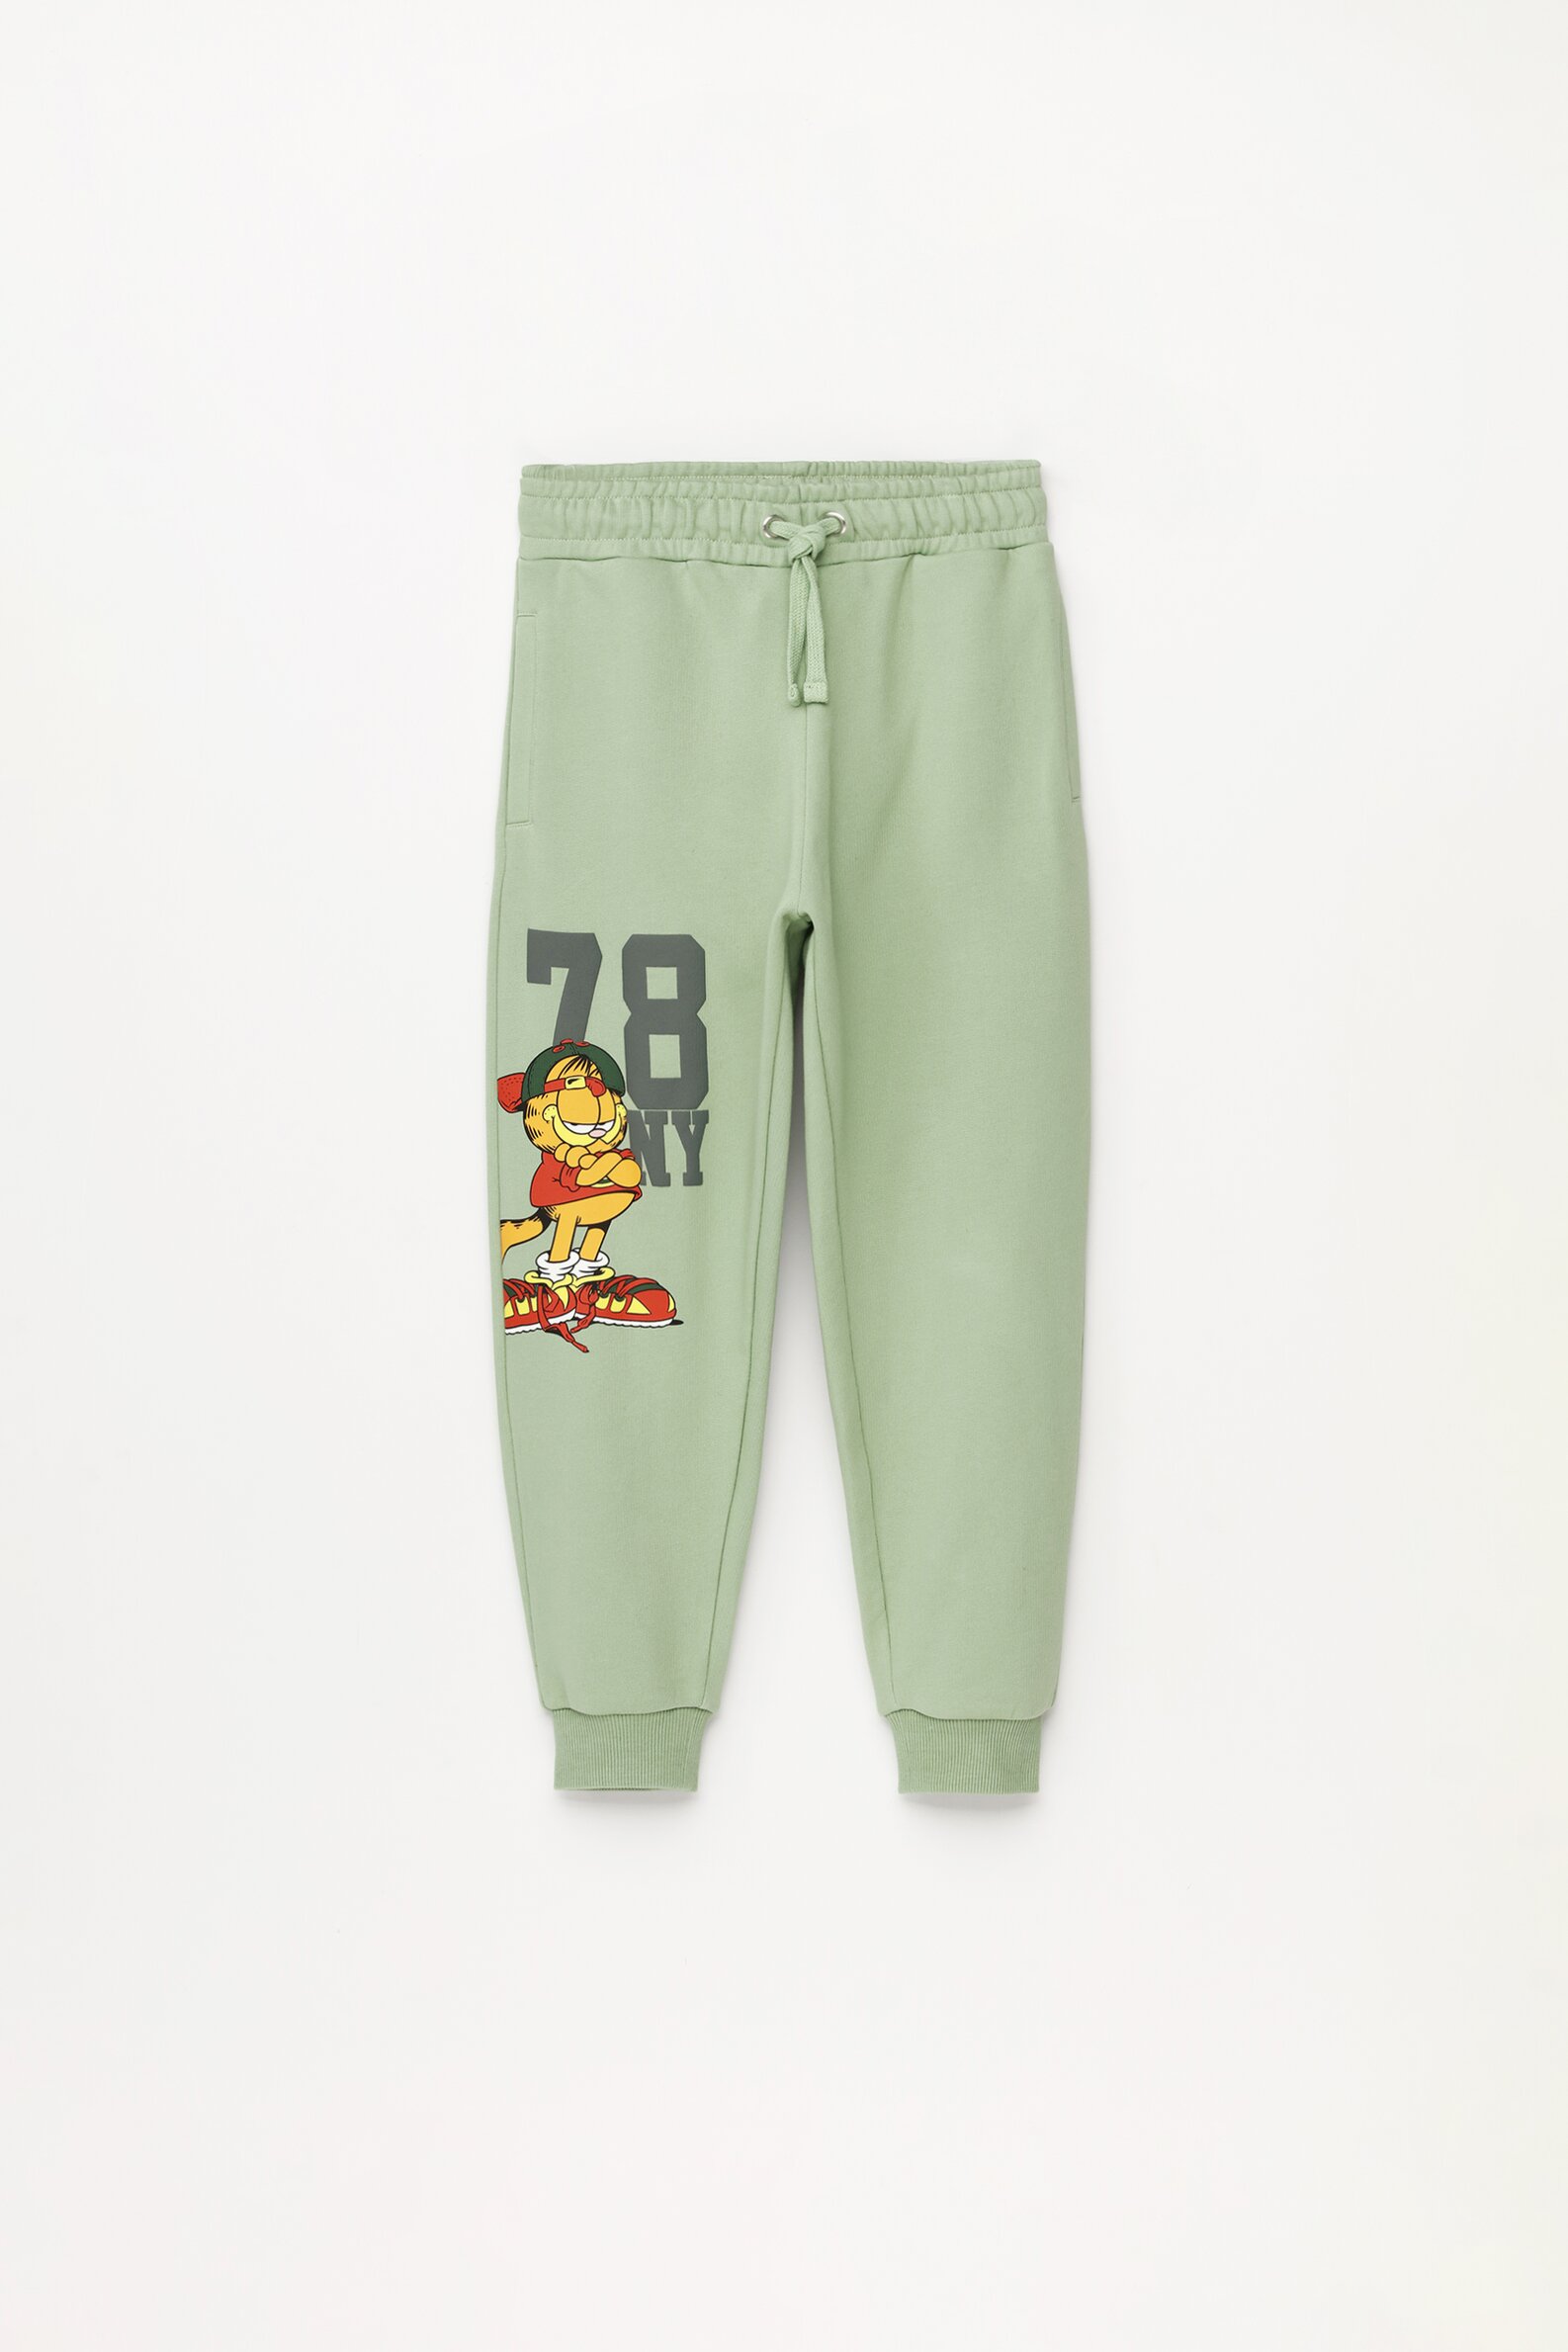 Garfield ©Nickelodeon plush trousers - Tracksuits - Trousers - CLOTHING -  Boy - Kids 